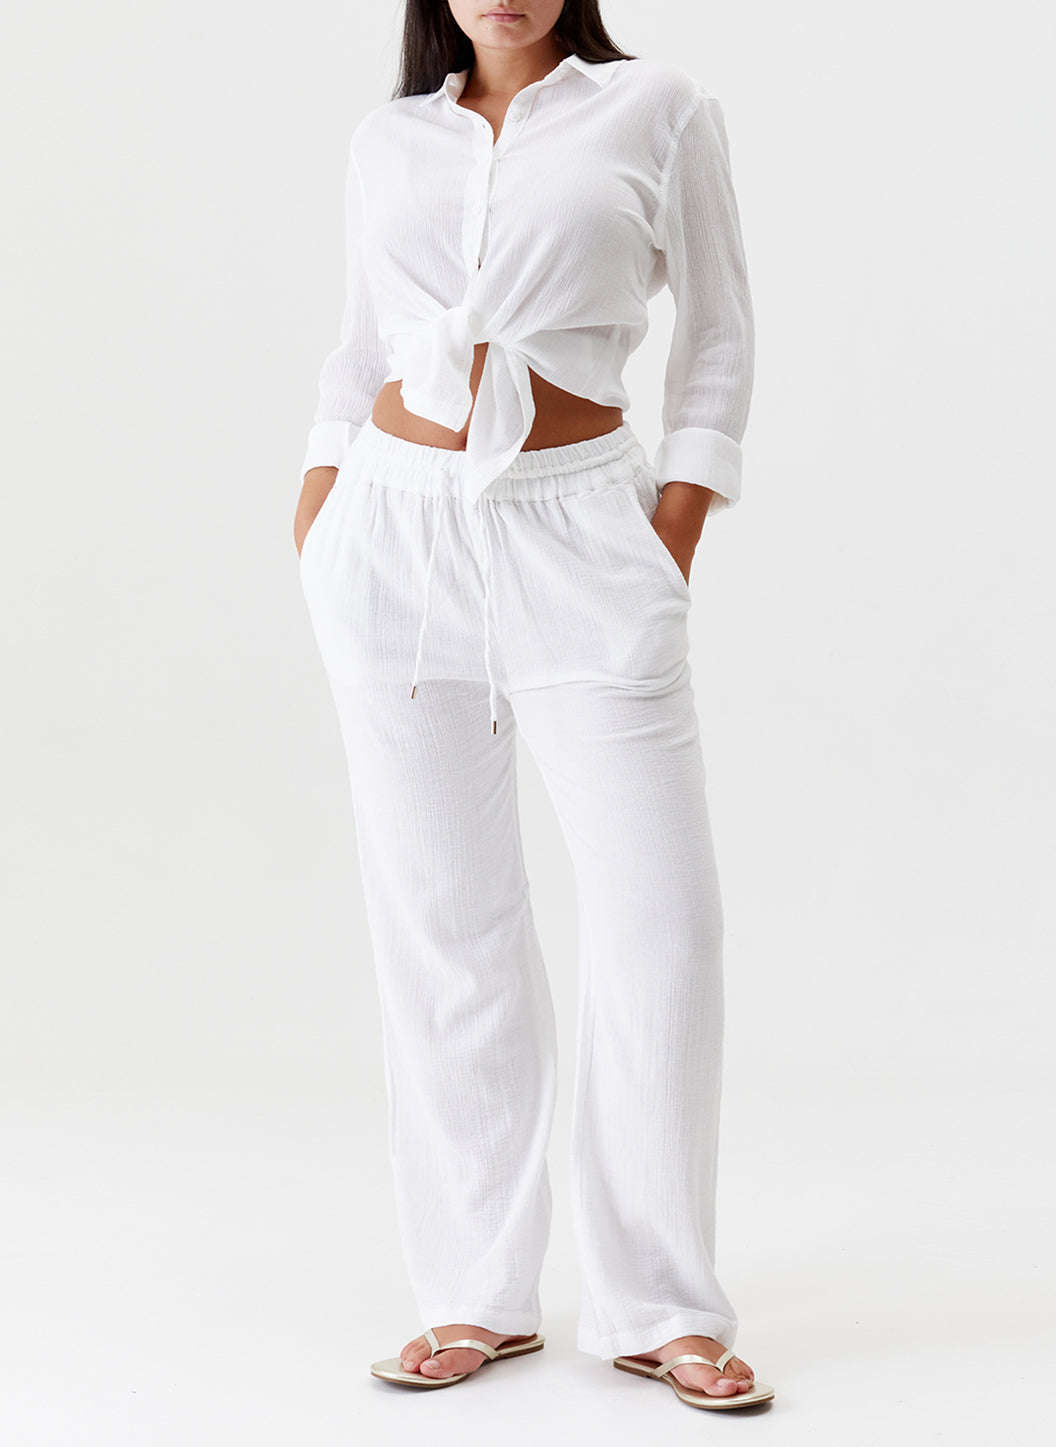 Melissa Odabash Krissy White Straight Leg Trousers - 2024 Collection